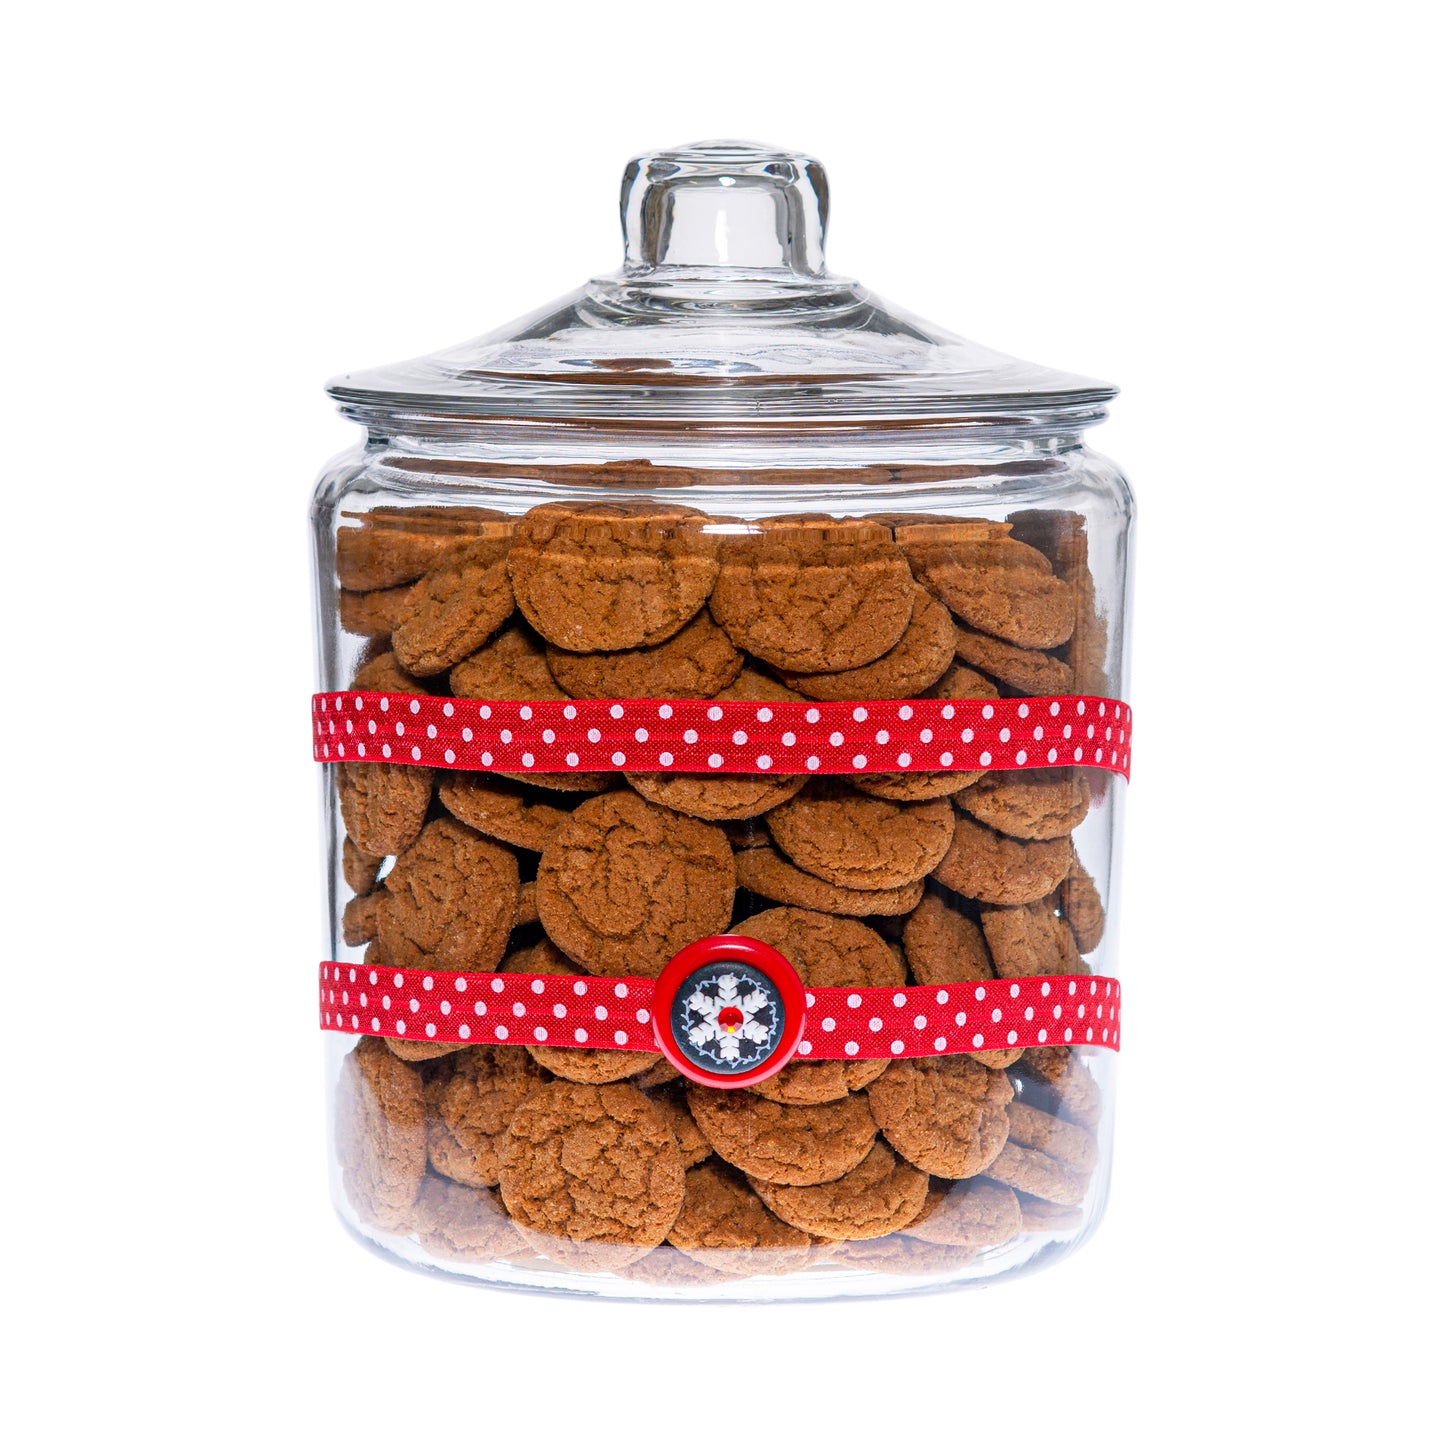 7" x 10" 1 Gallon Cookie Jar Red White Polka Dot 1X 2 Chalkboard Star Cookies For Santa Holiday Collection Complete Set FREE SHIPPING